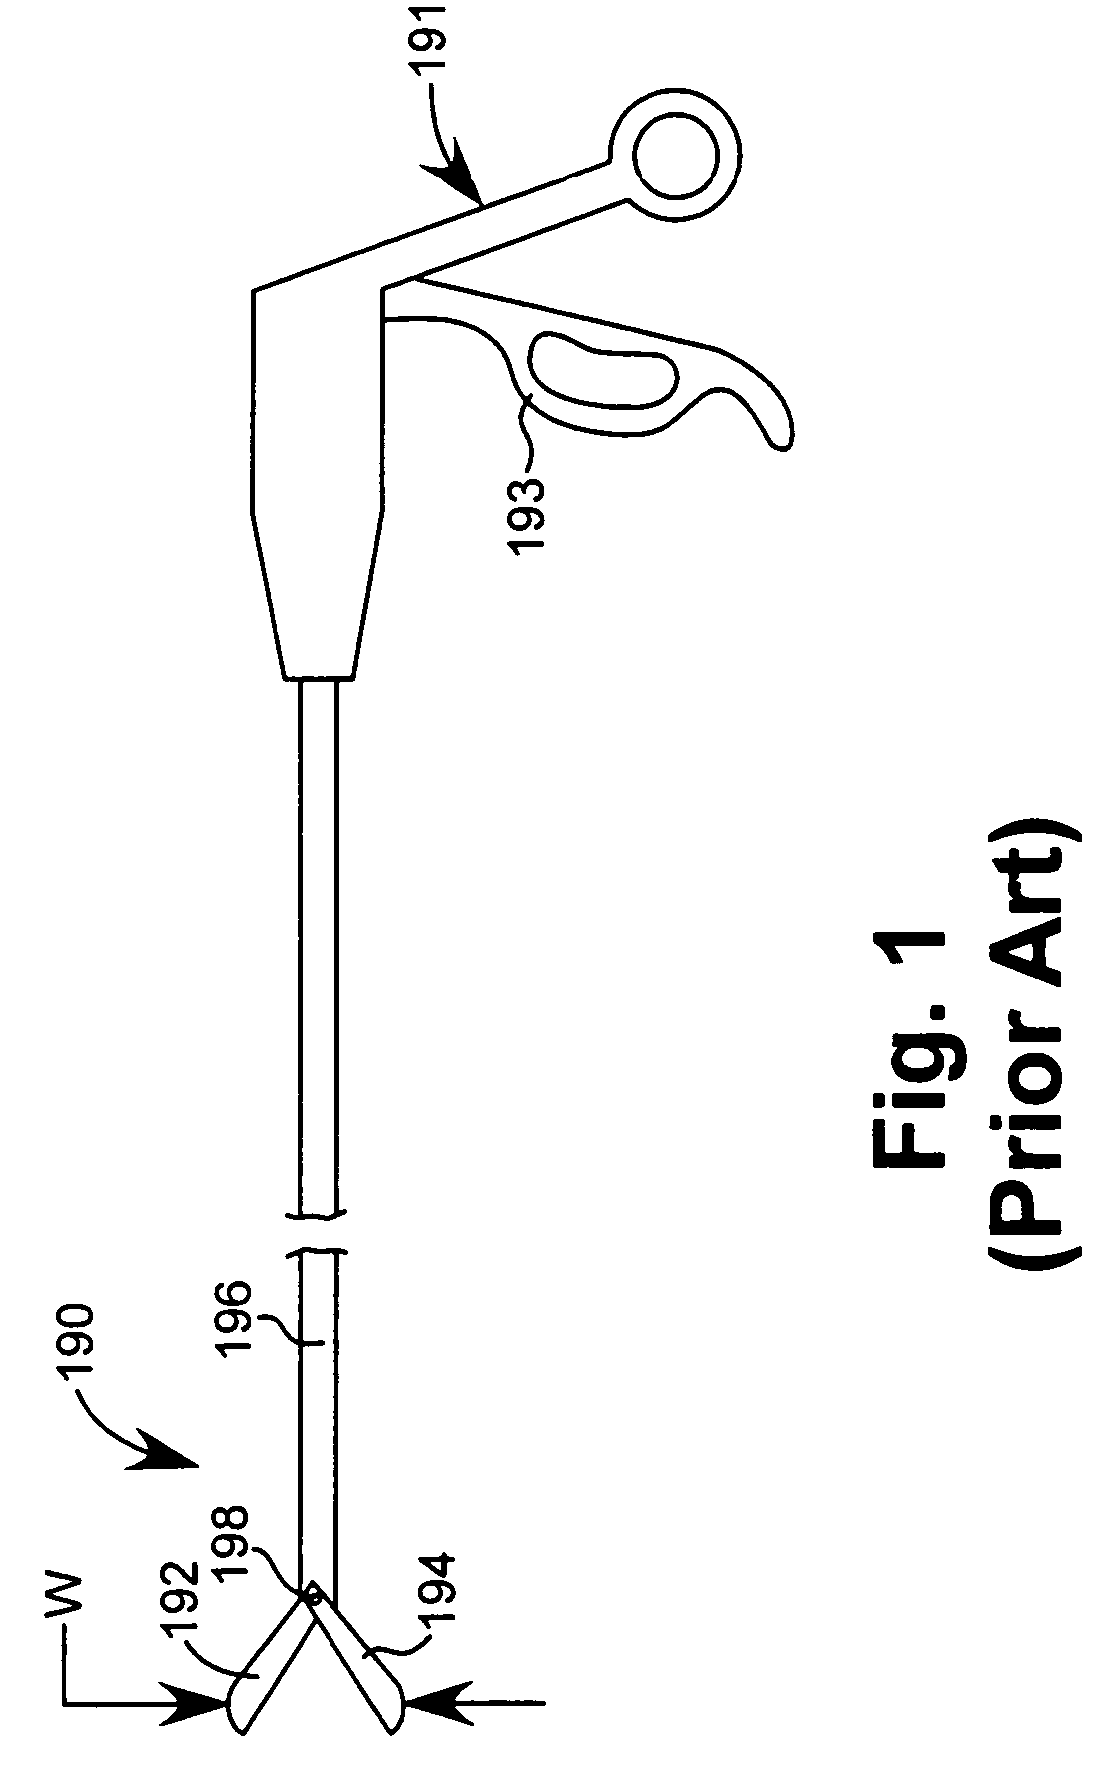 Apparatus and method for minimally invasive surgery using rotational cutting tool